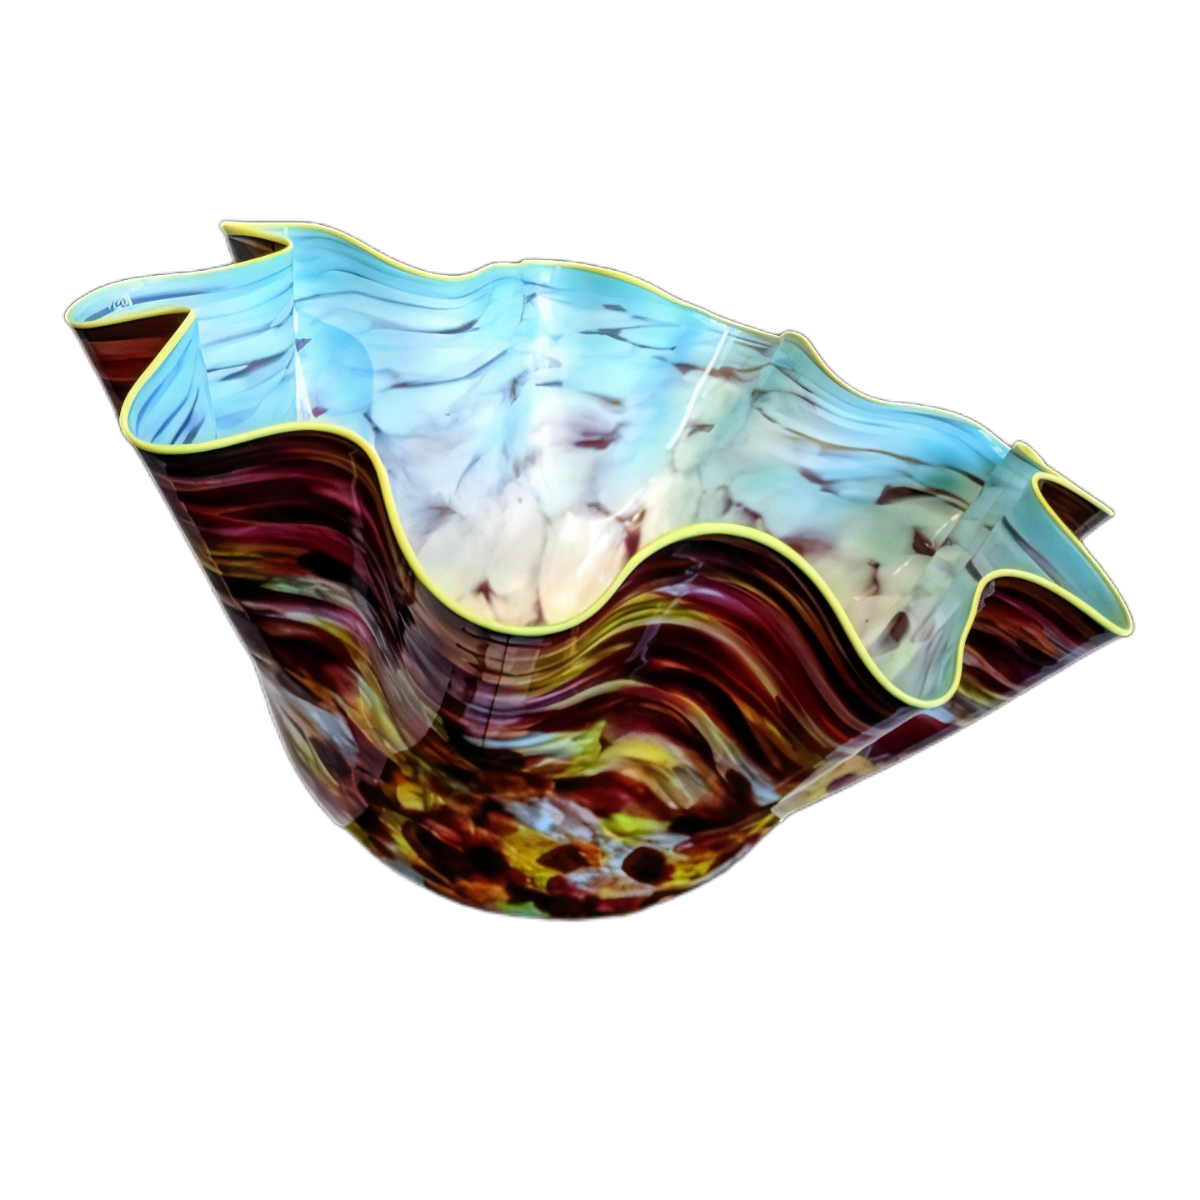 Artwork By Dale Chihuly Etain Blue Macchia With Pale Green Lip Wrap · Habatat Galleries